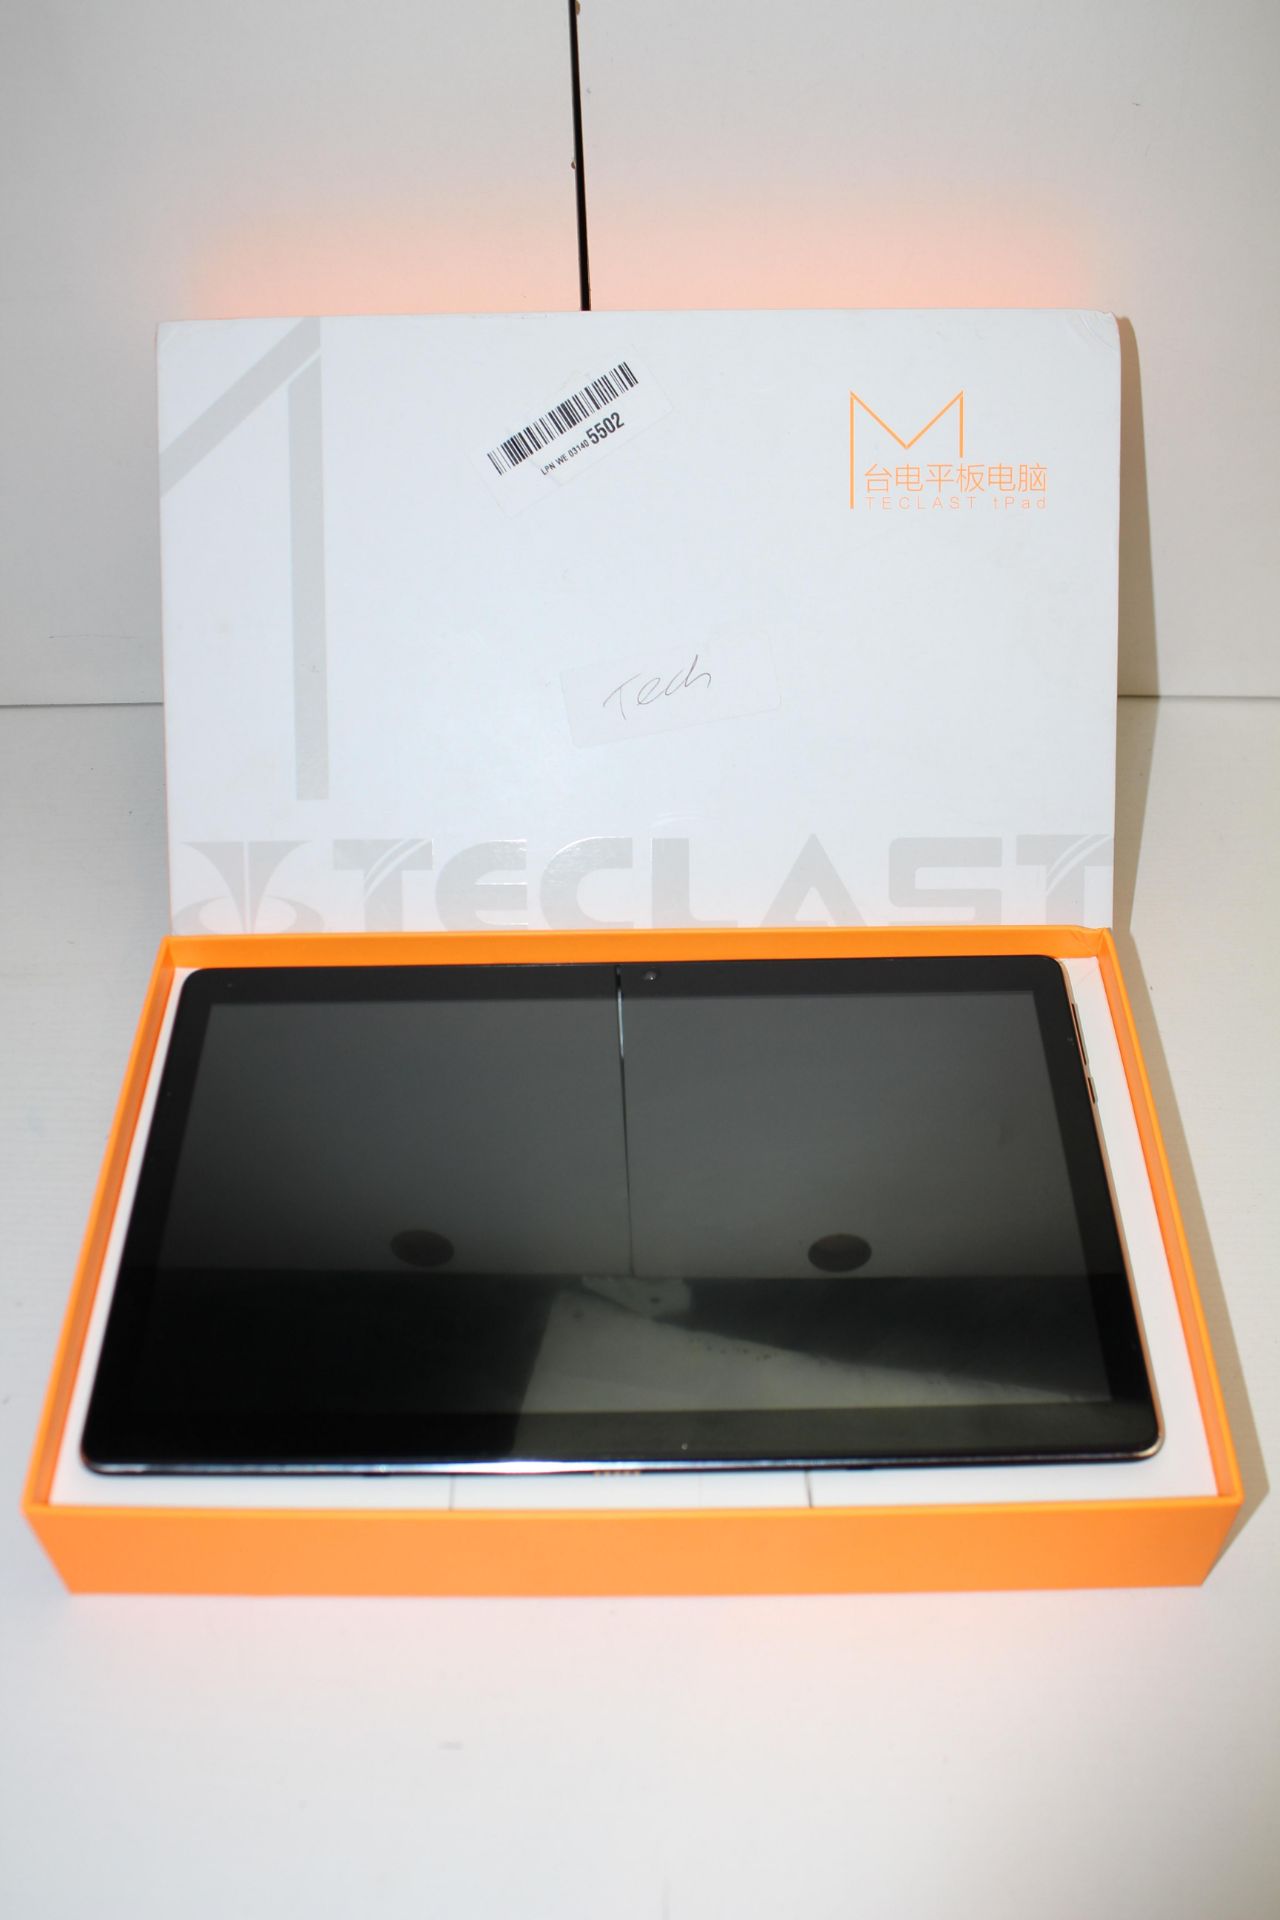 BOXED TECKLAST M16 TPAD TABLET PC RRP £137.82Condition ReportAppraisal Available on Request- All